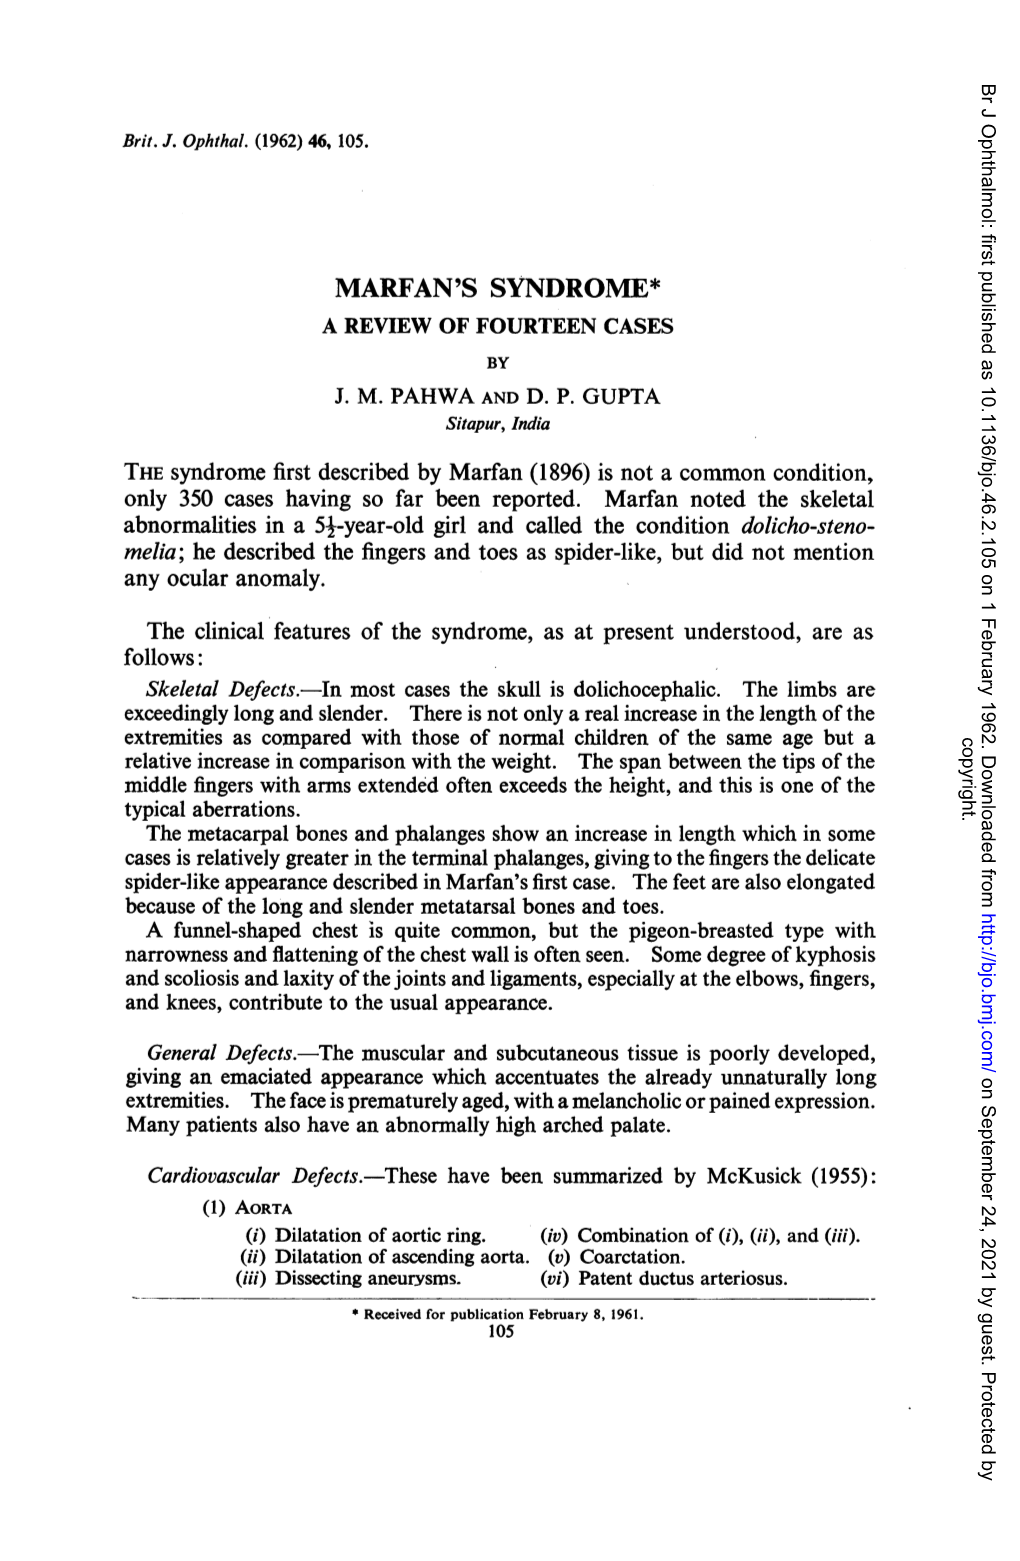 Marfan's Syndrome* a Review of Fourteen Cases by J